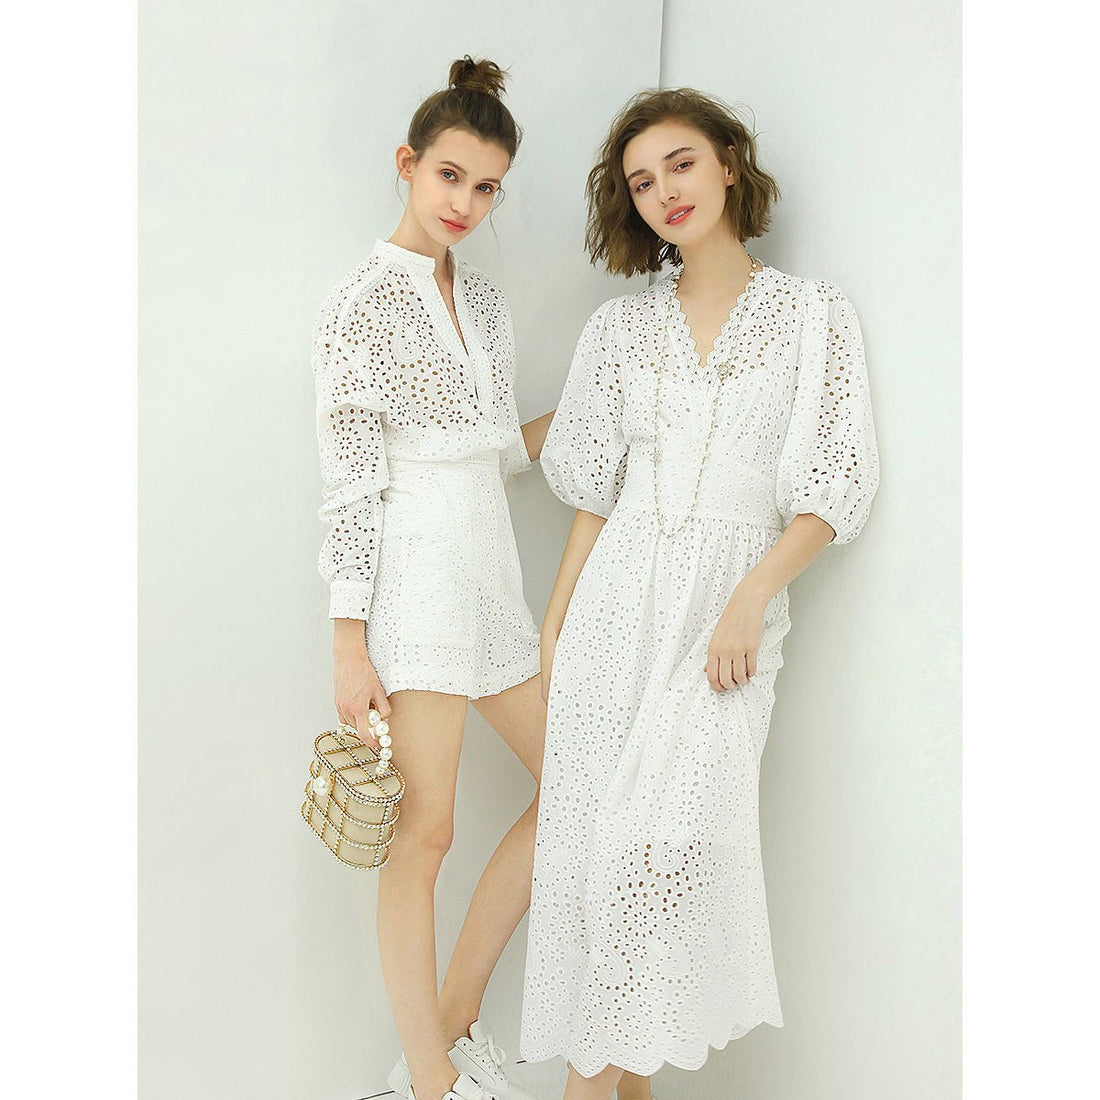 French Lace Cutwork Embroidery White Cotton Dress - 0cm